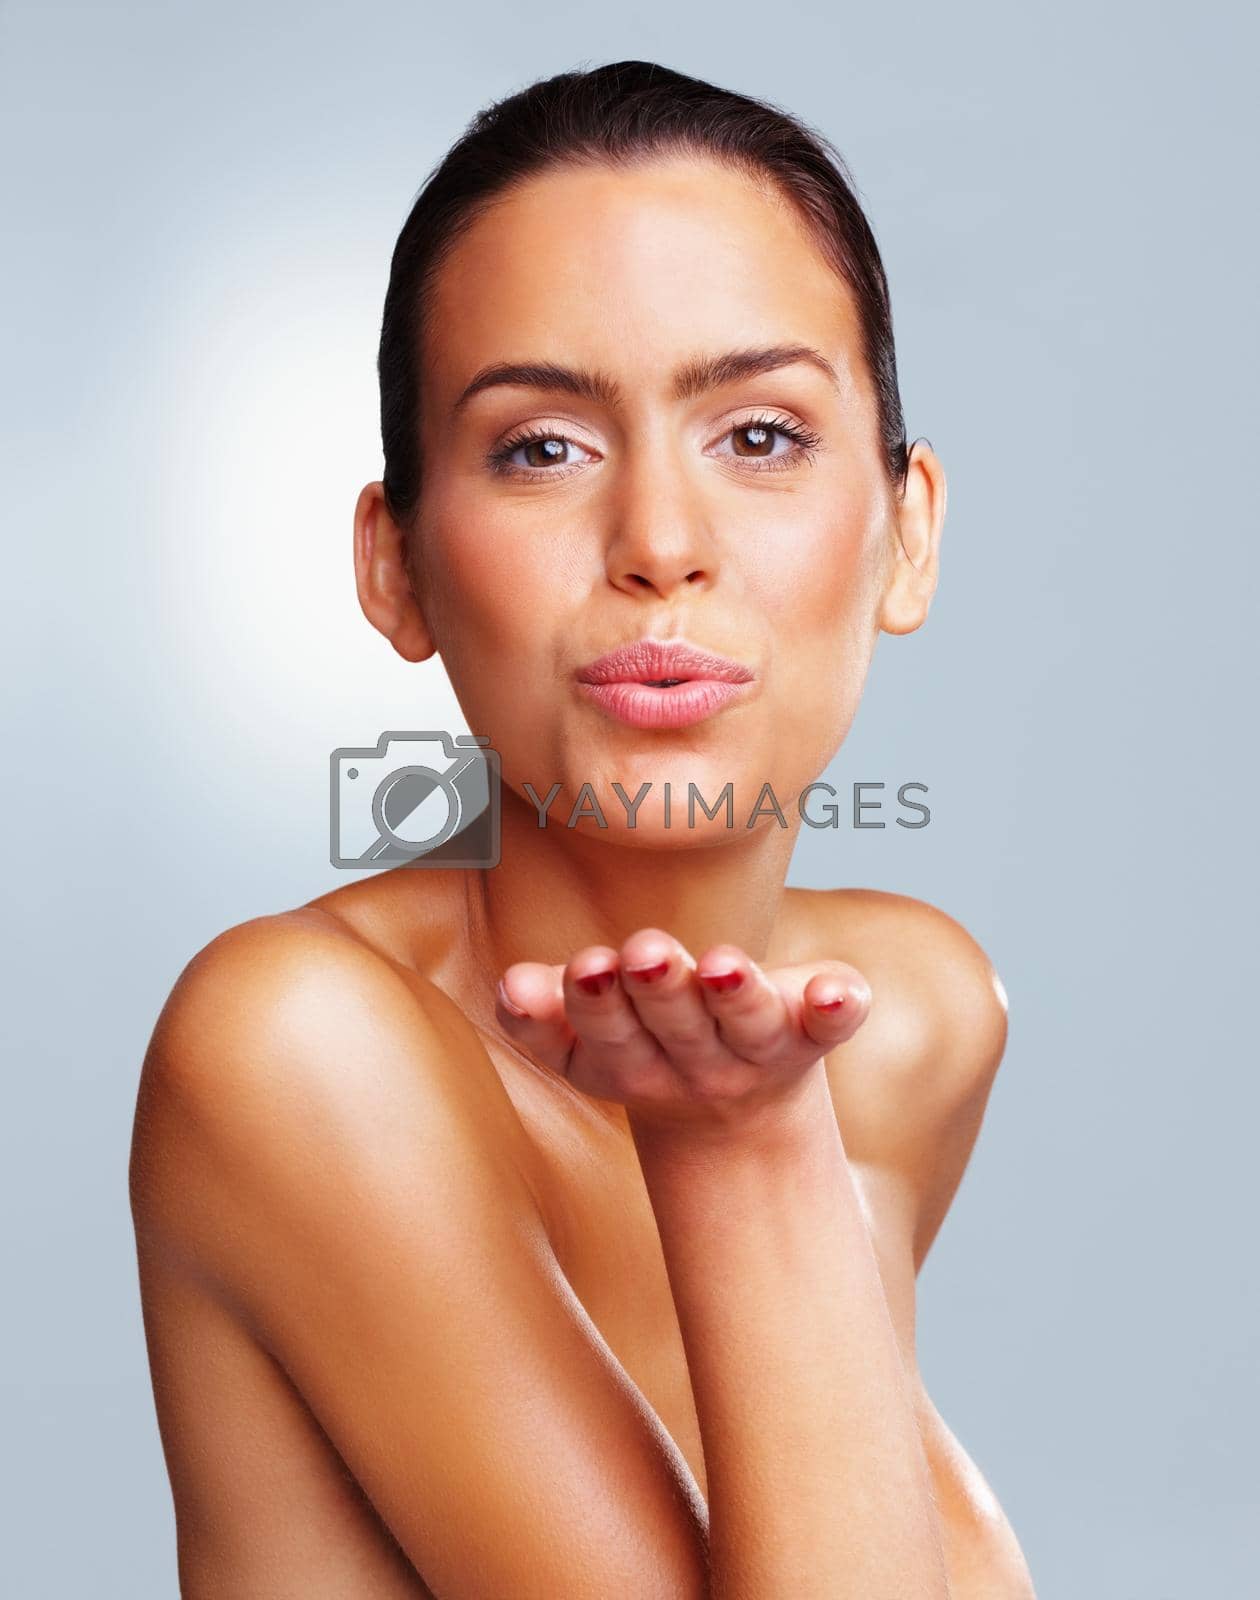 Royalty free image of Naked young woman giving you a flying kiss. Portrait of a naked young woman giving you a flying kiss against colored background. by YuriArcurs